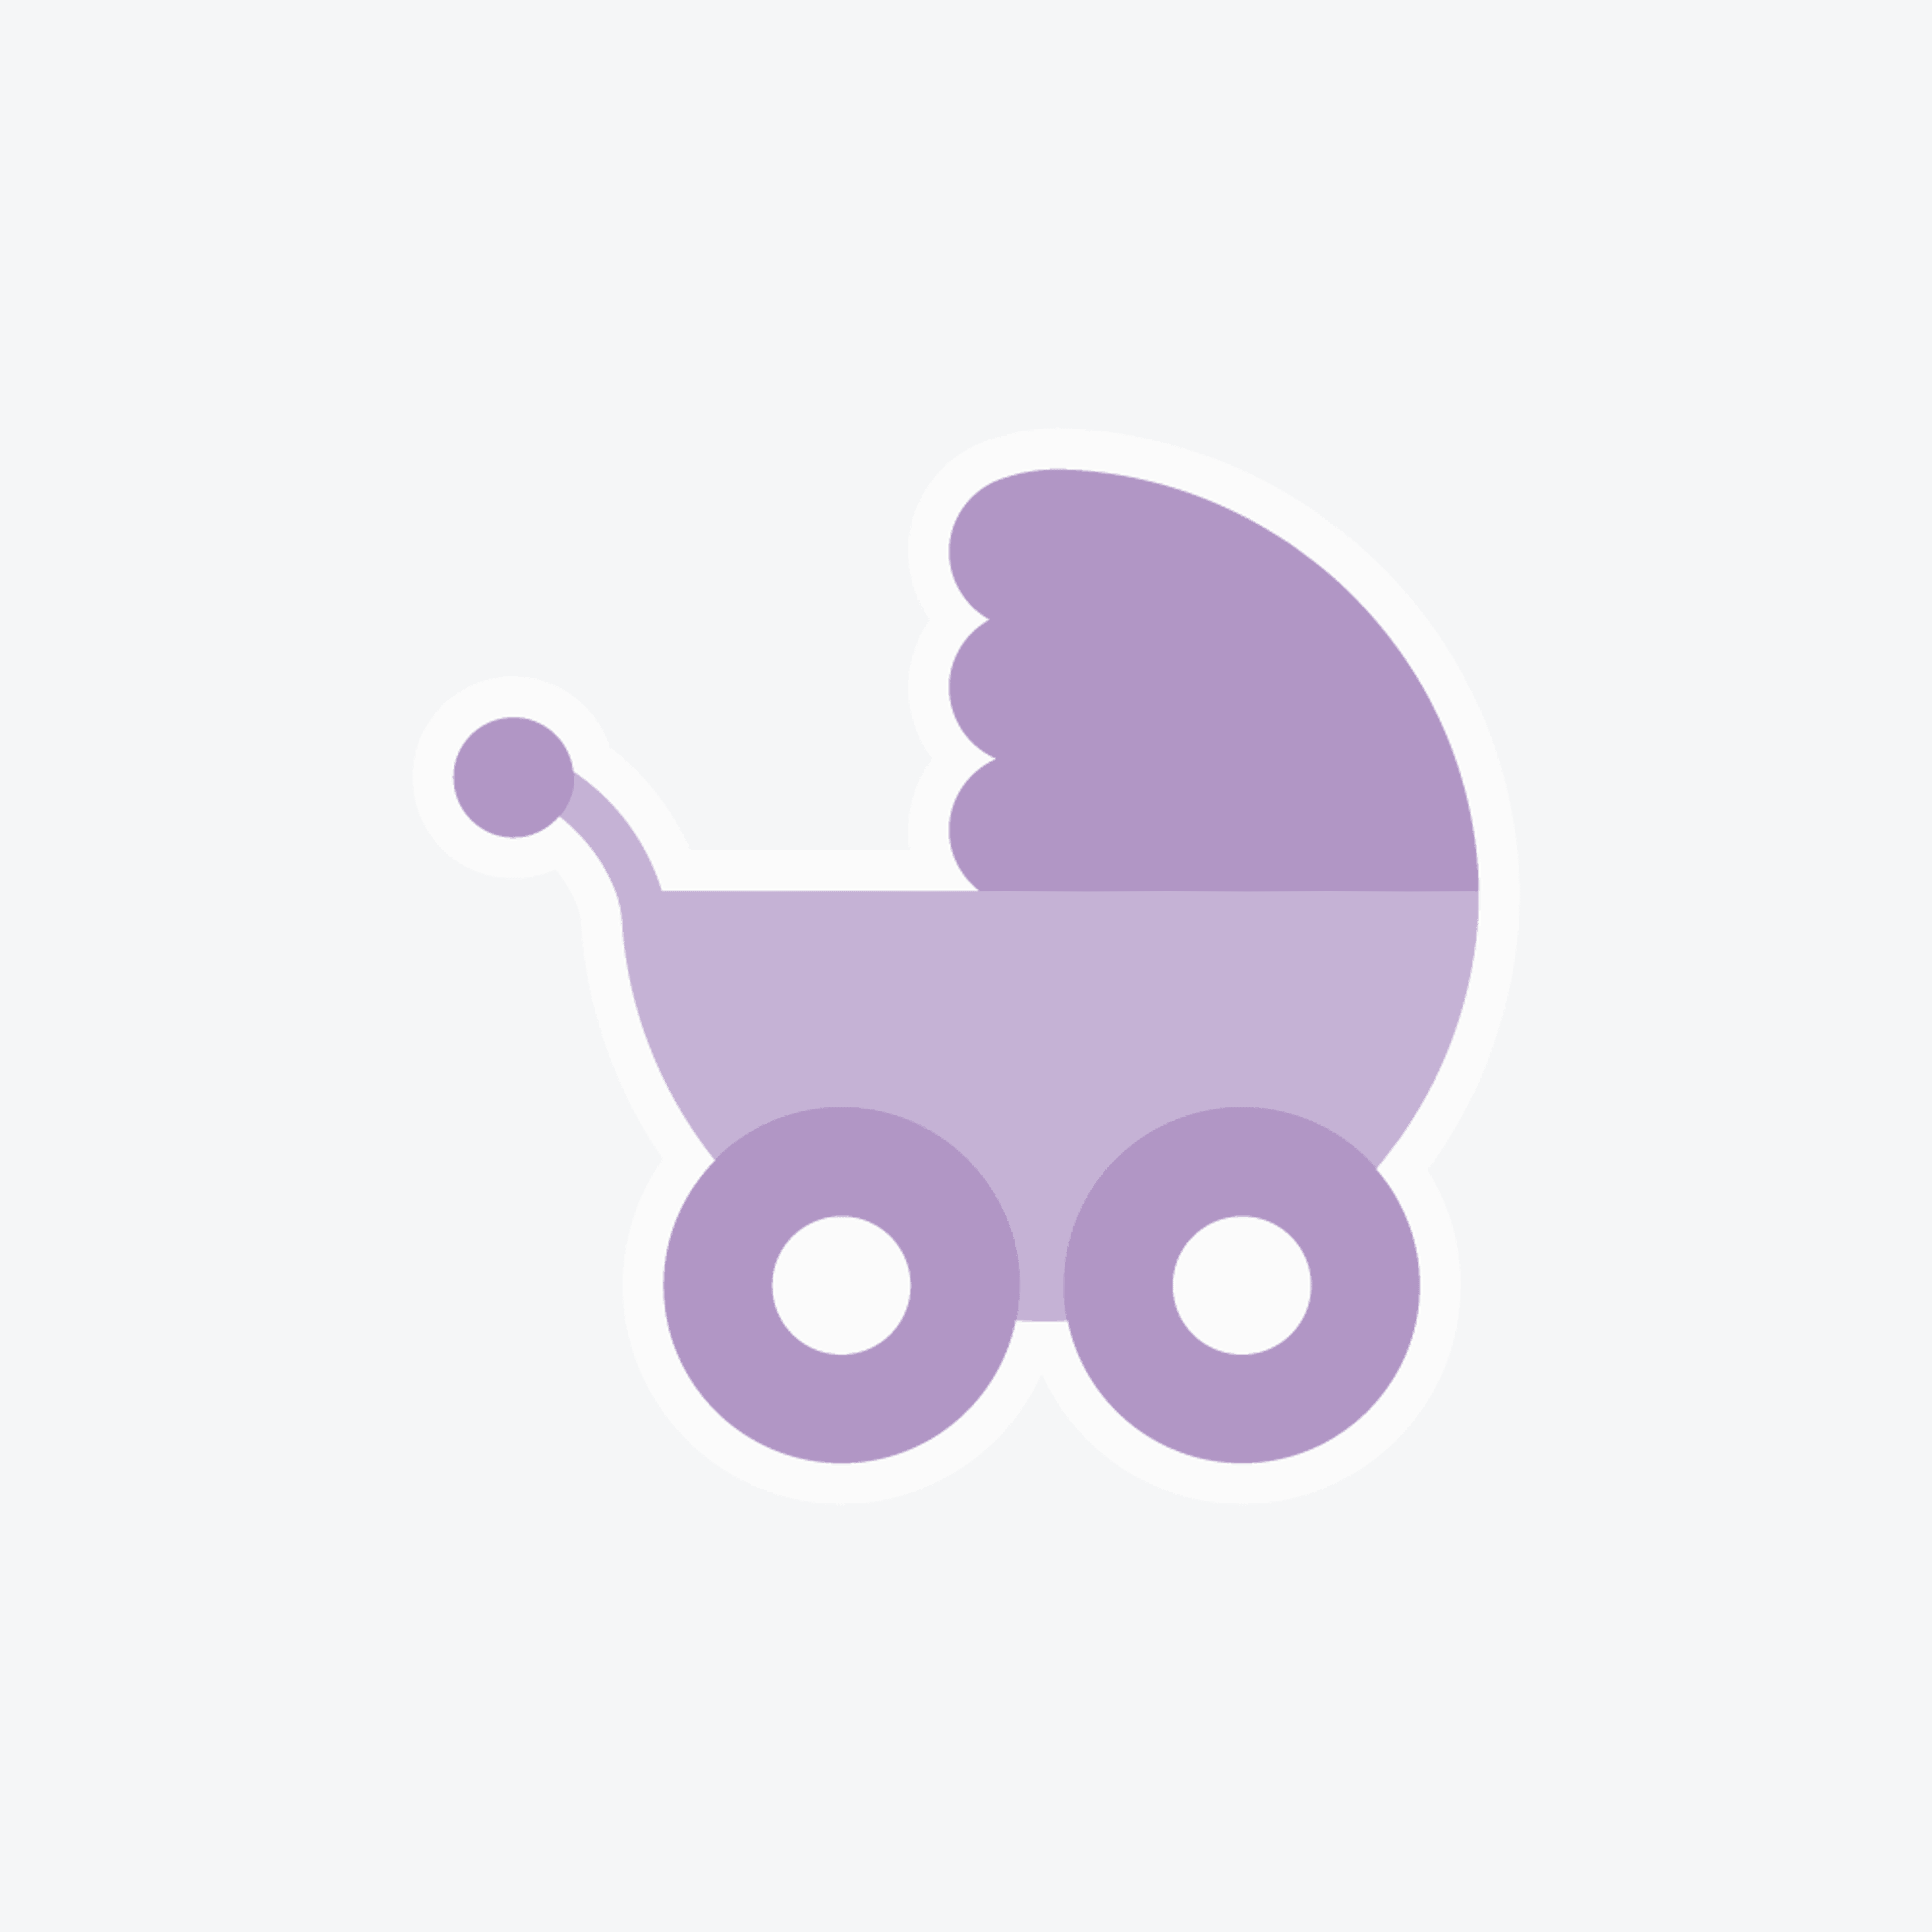 Looking for nanny for 9 month old